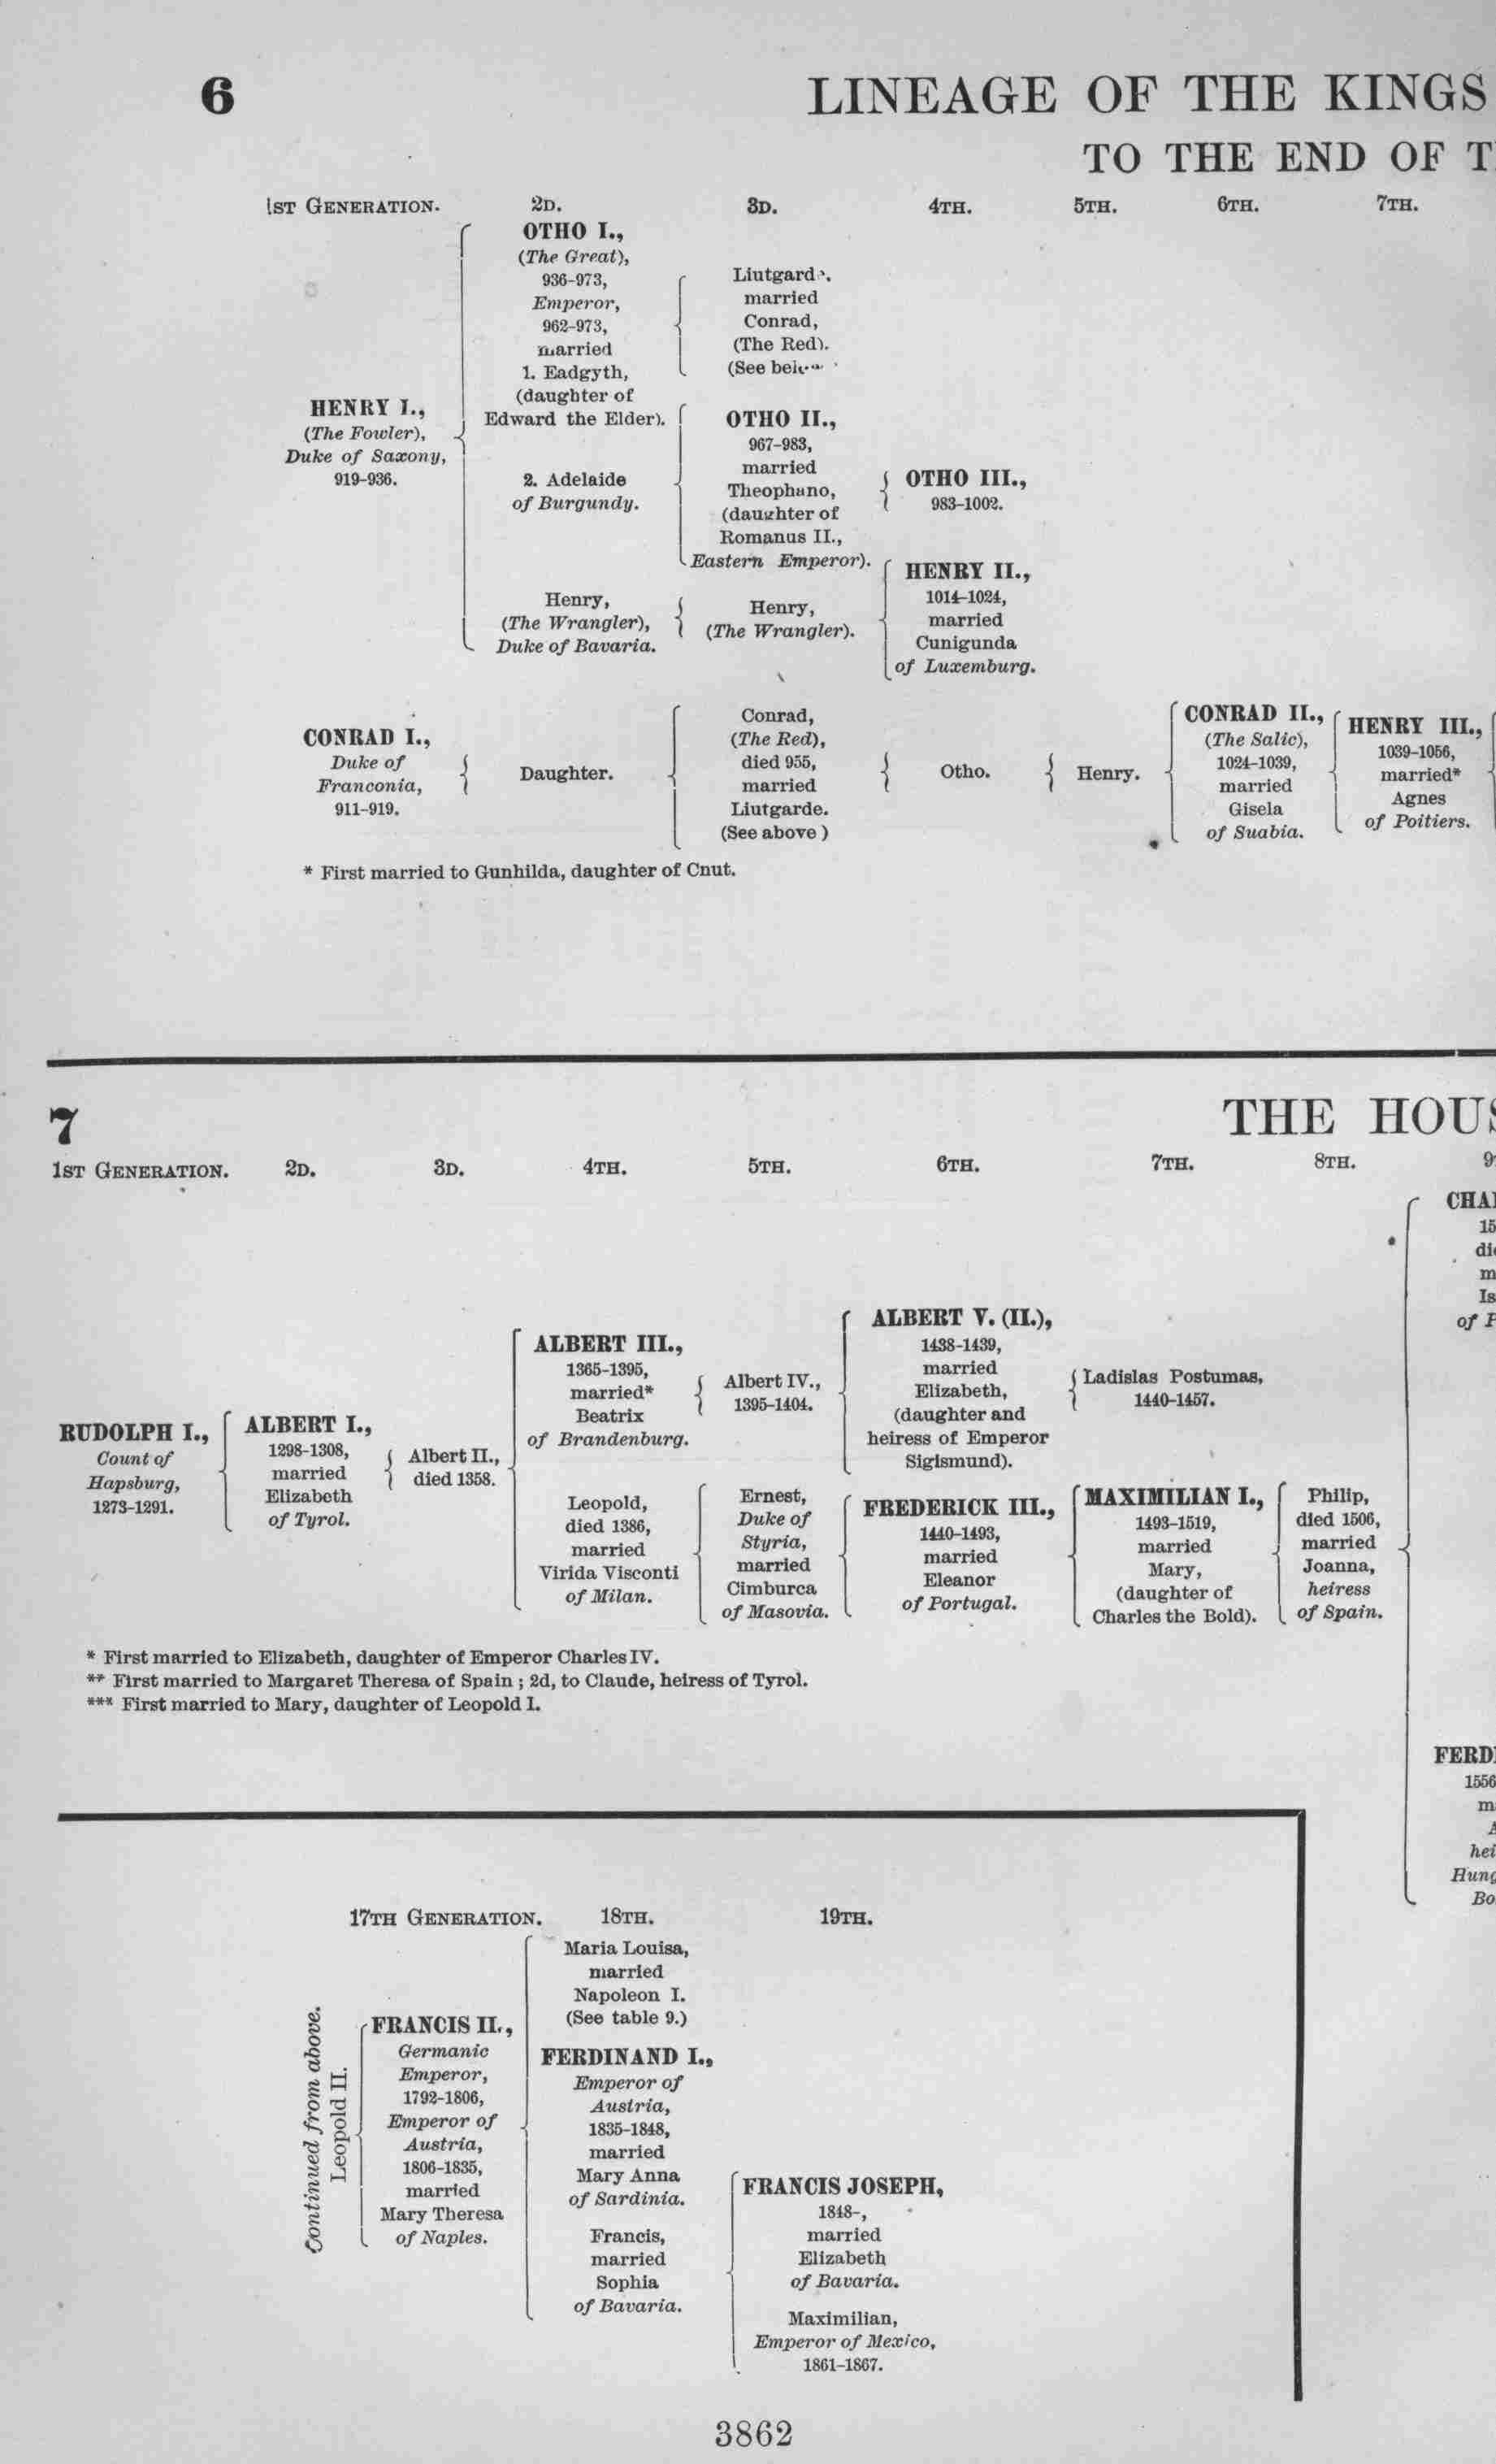 LINEAGE OF THE KINGS OF GERMANY AND EMPERORS